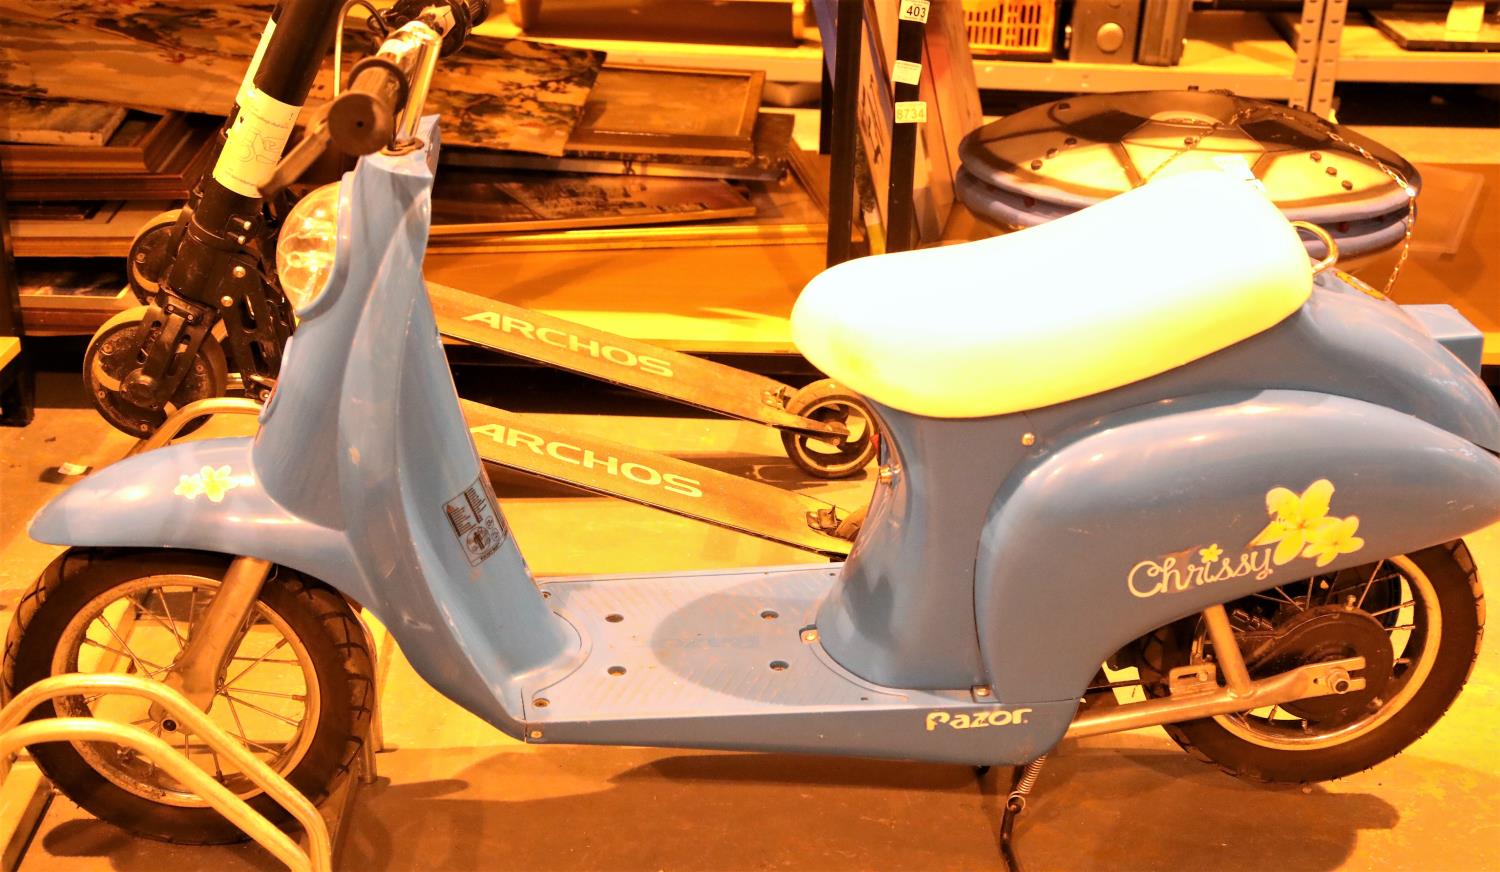 Razor childs battery operated vespa type scooter with charging cable. Not available for in-house P&P